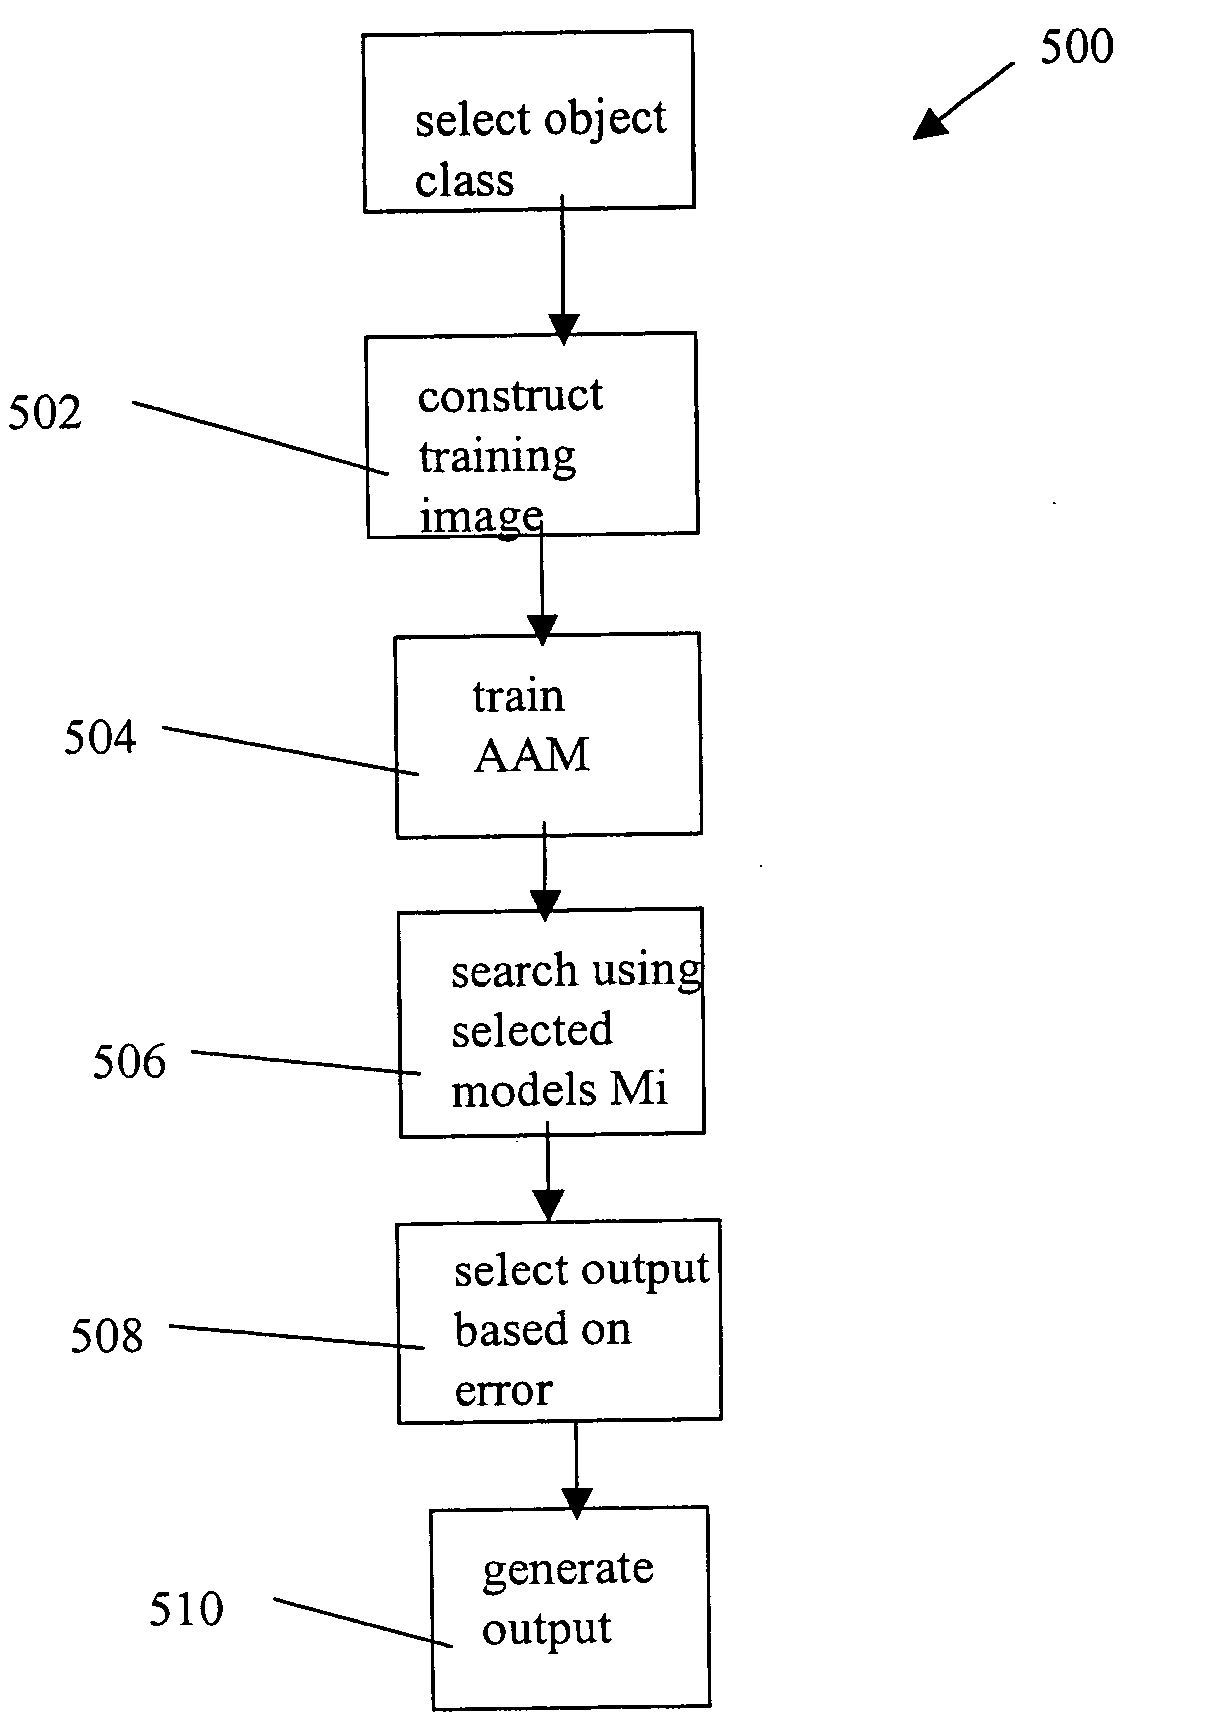 System and method for applying active appearance models to image analysis